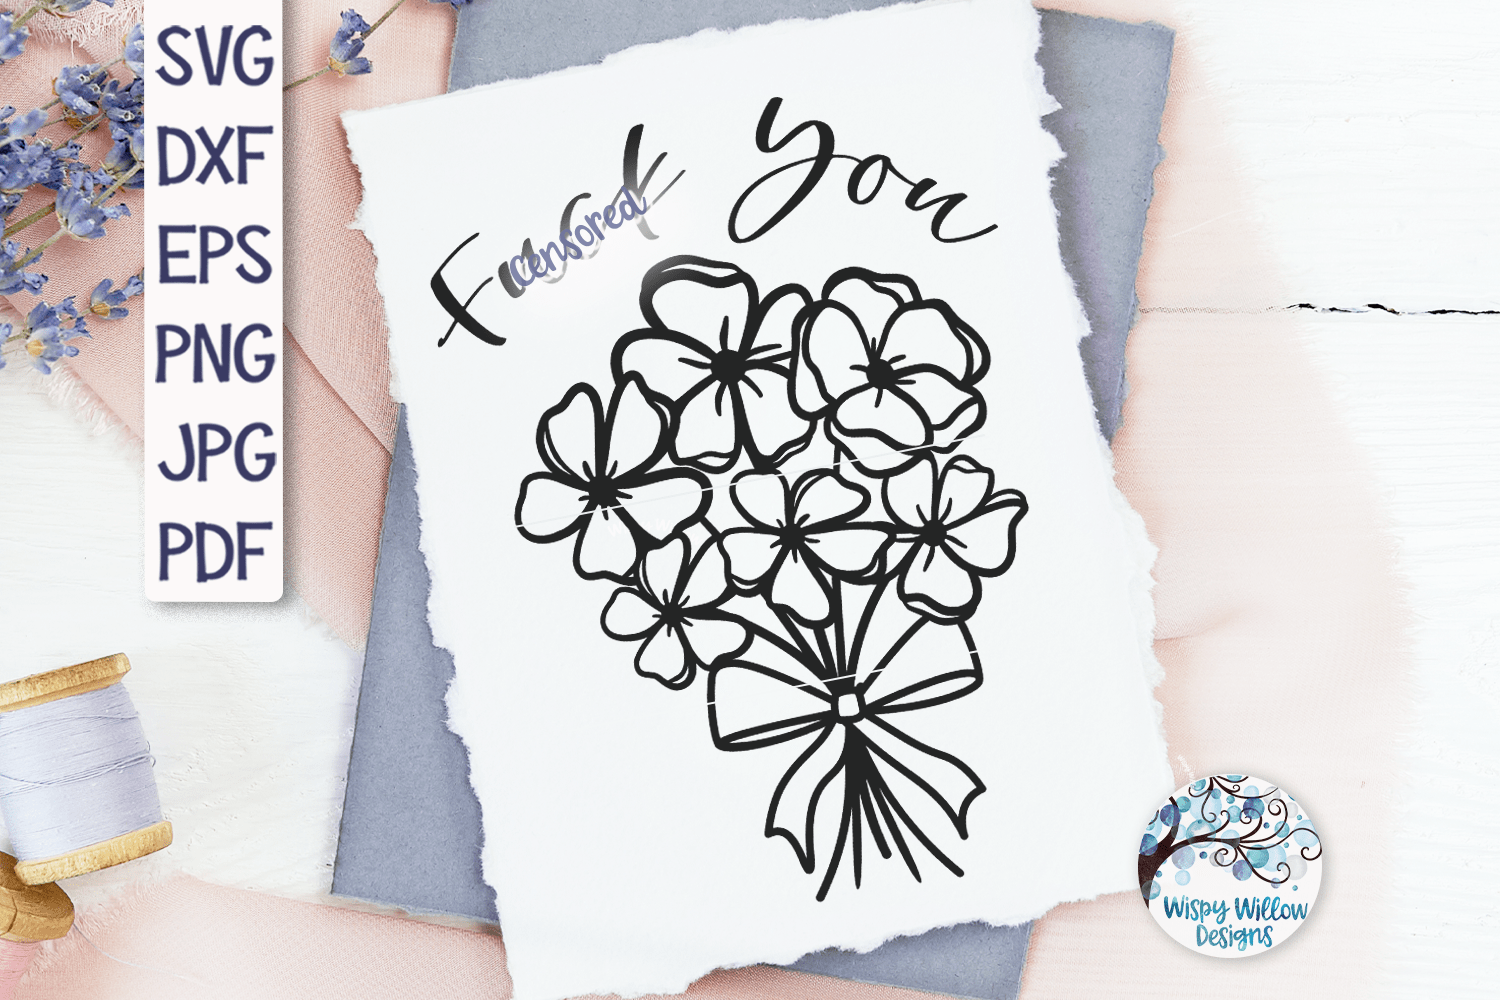 F*ck You Flowers SVG Wispy Willow Designs Company